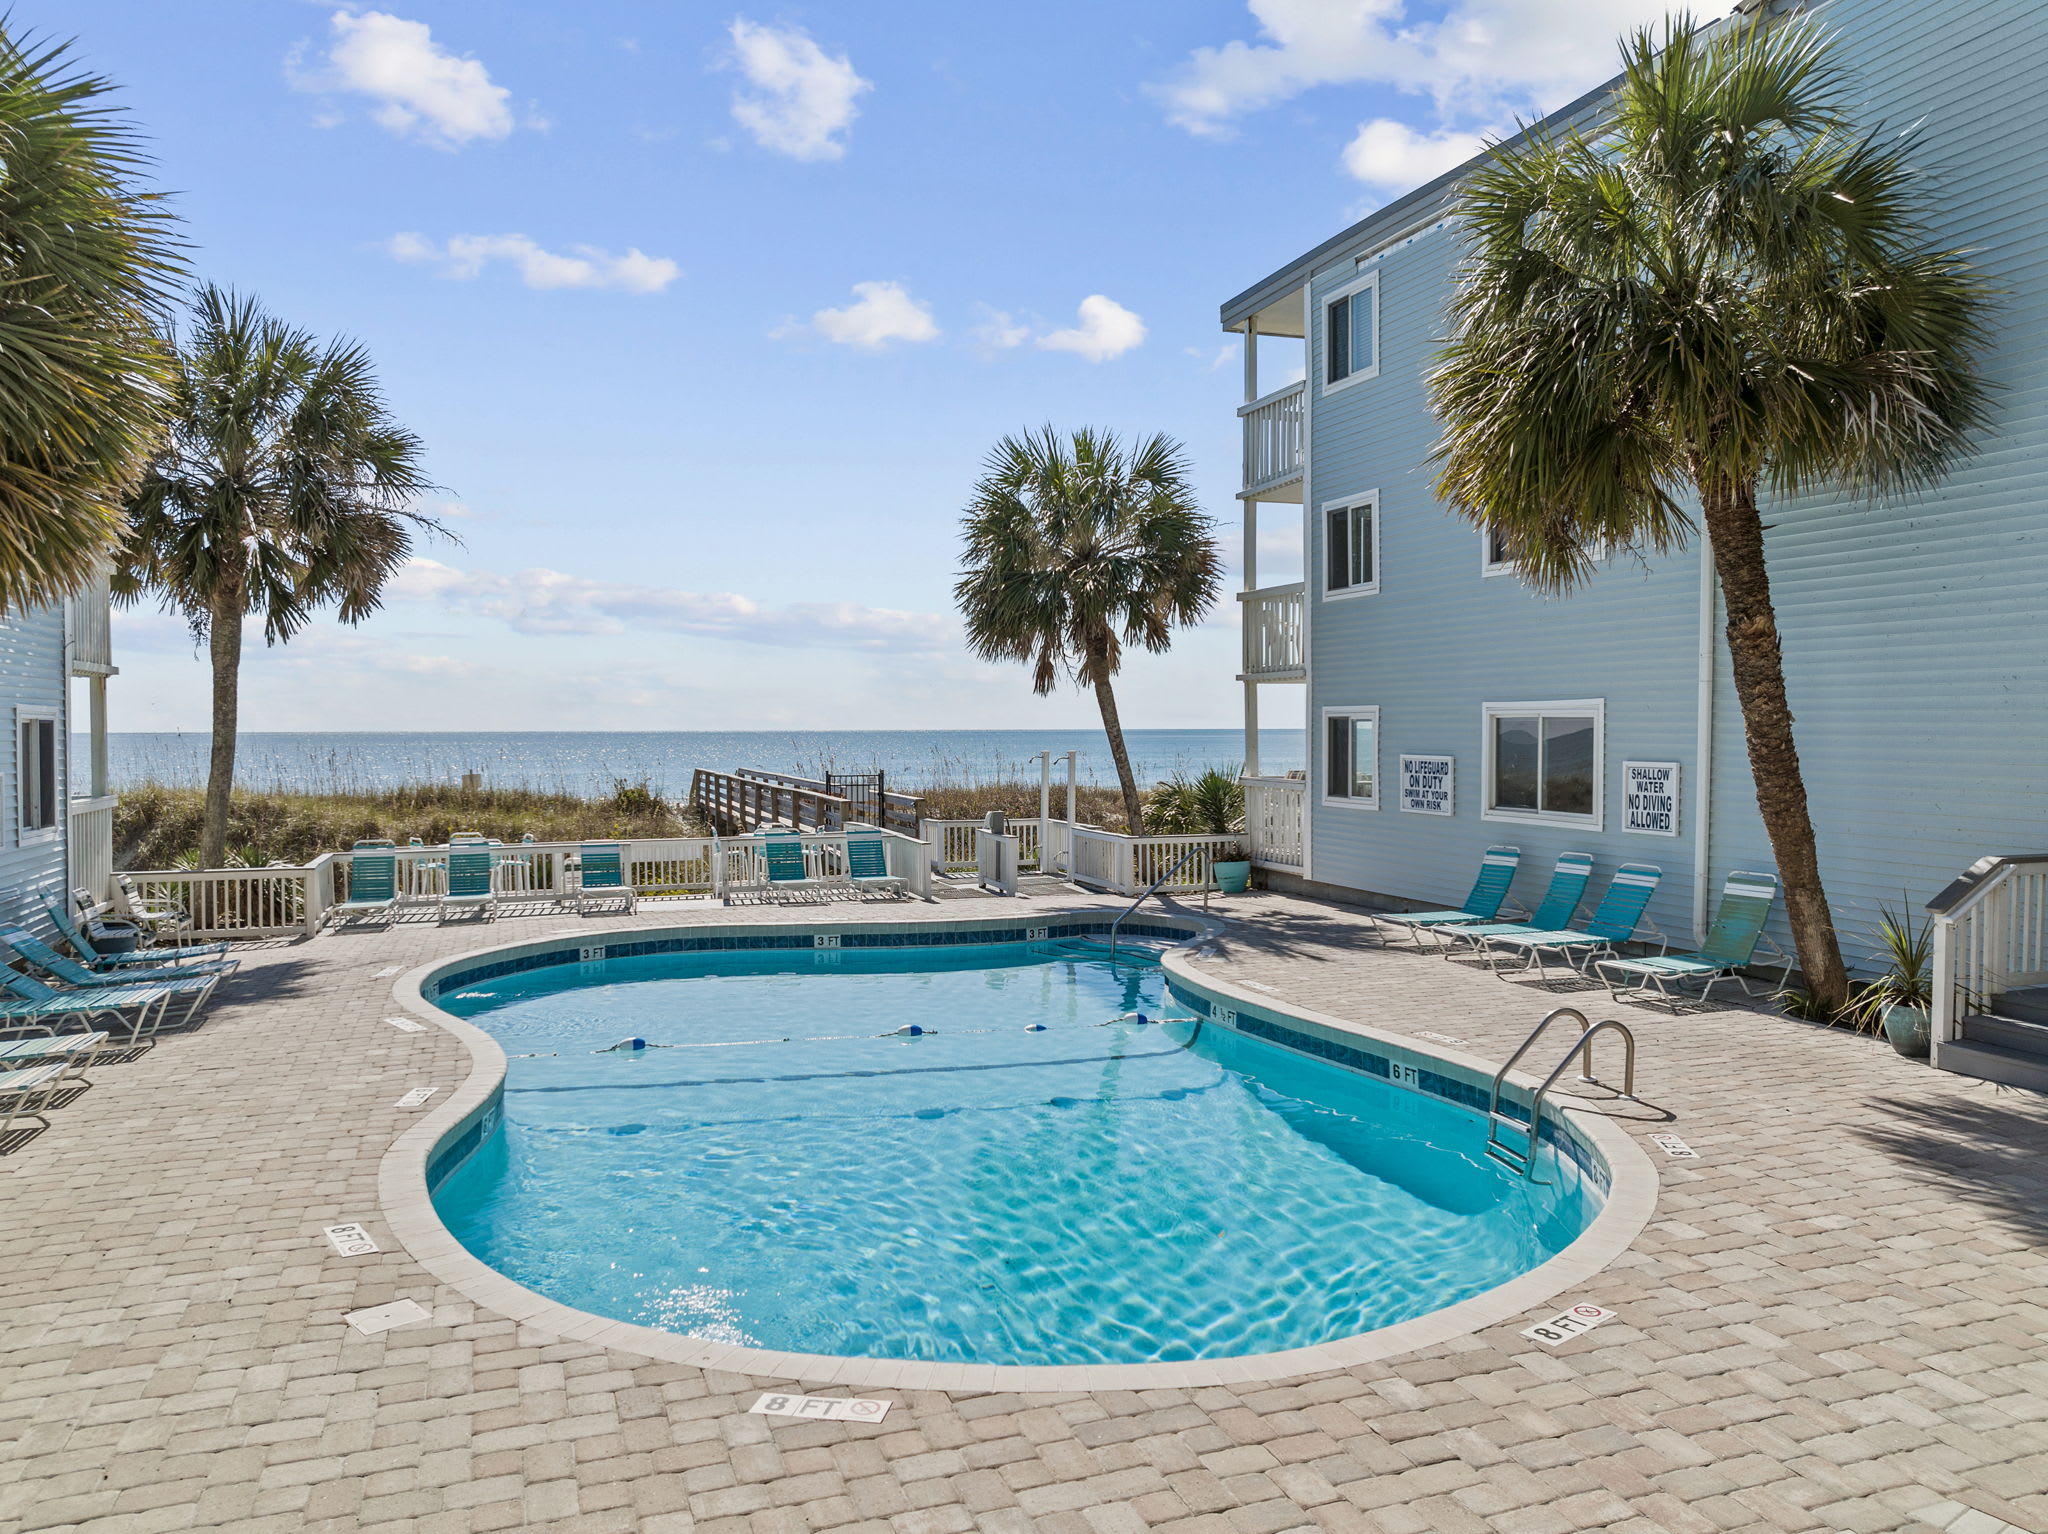 Shared pool with our small condo complex is well maintained and has the best view. Walk right out from the condo and take your pick.